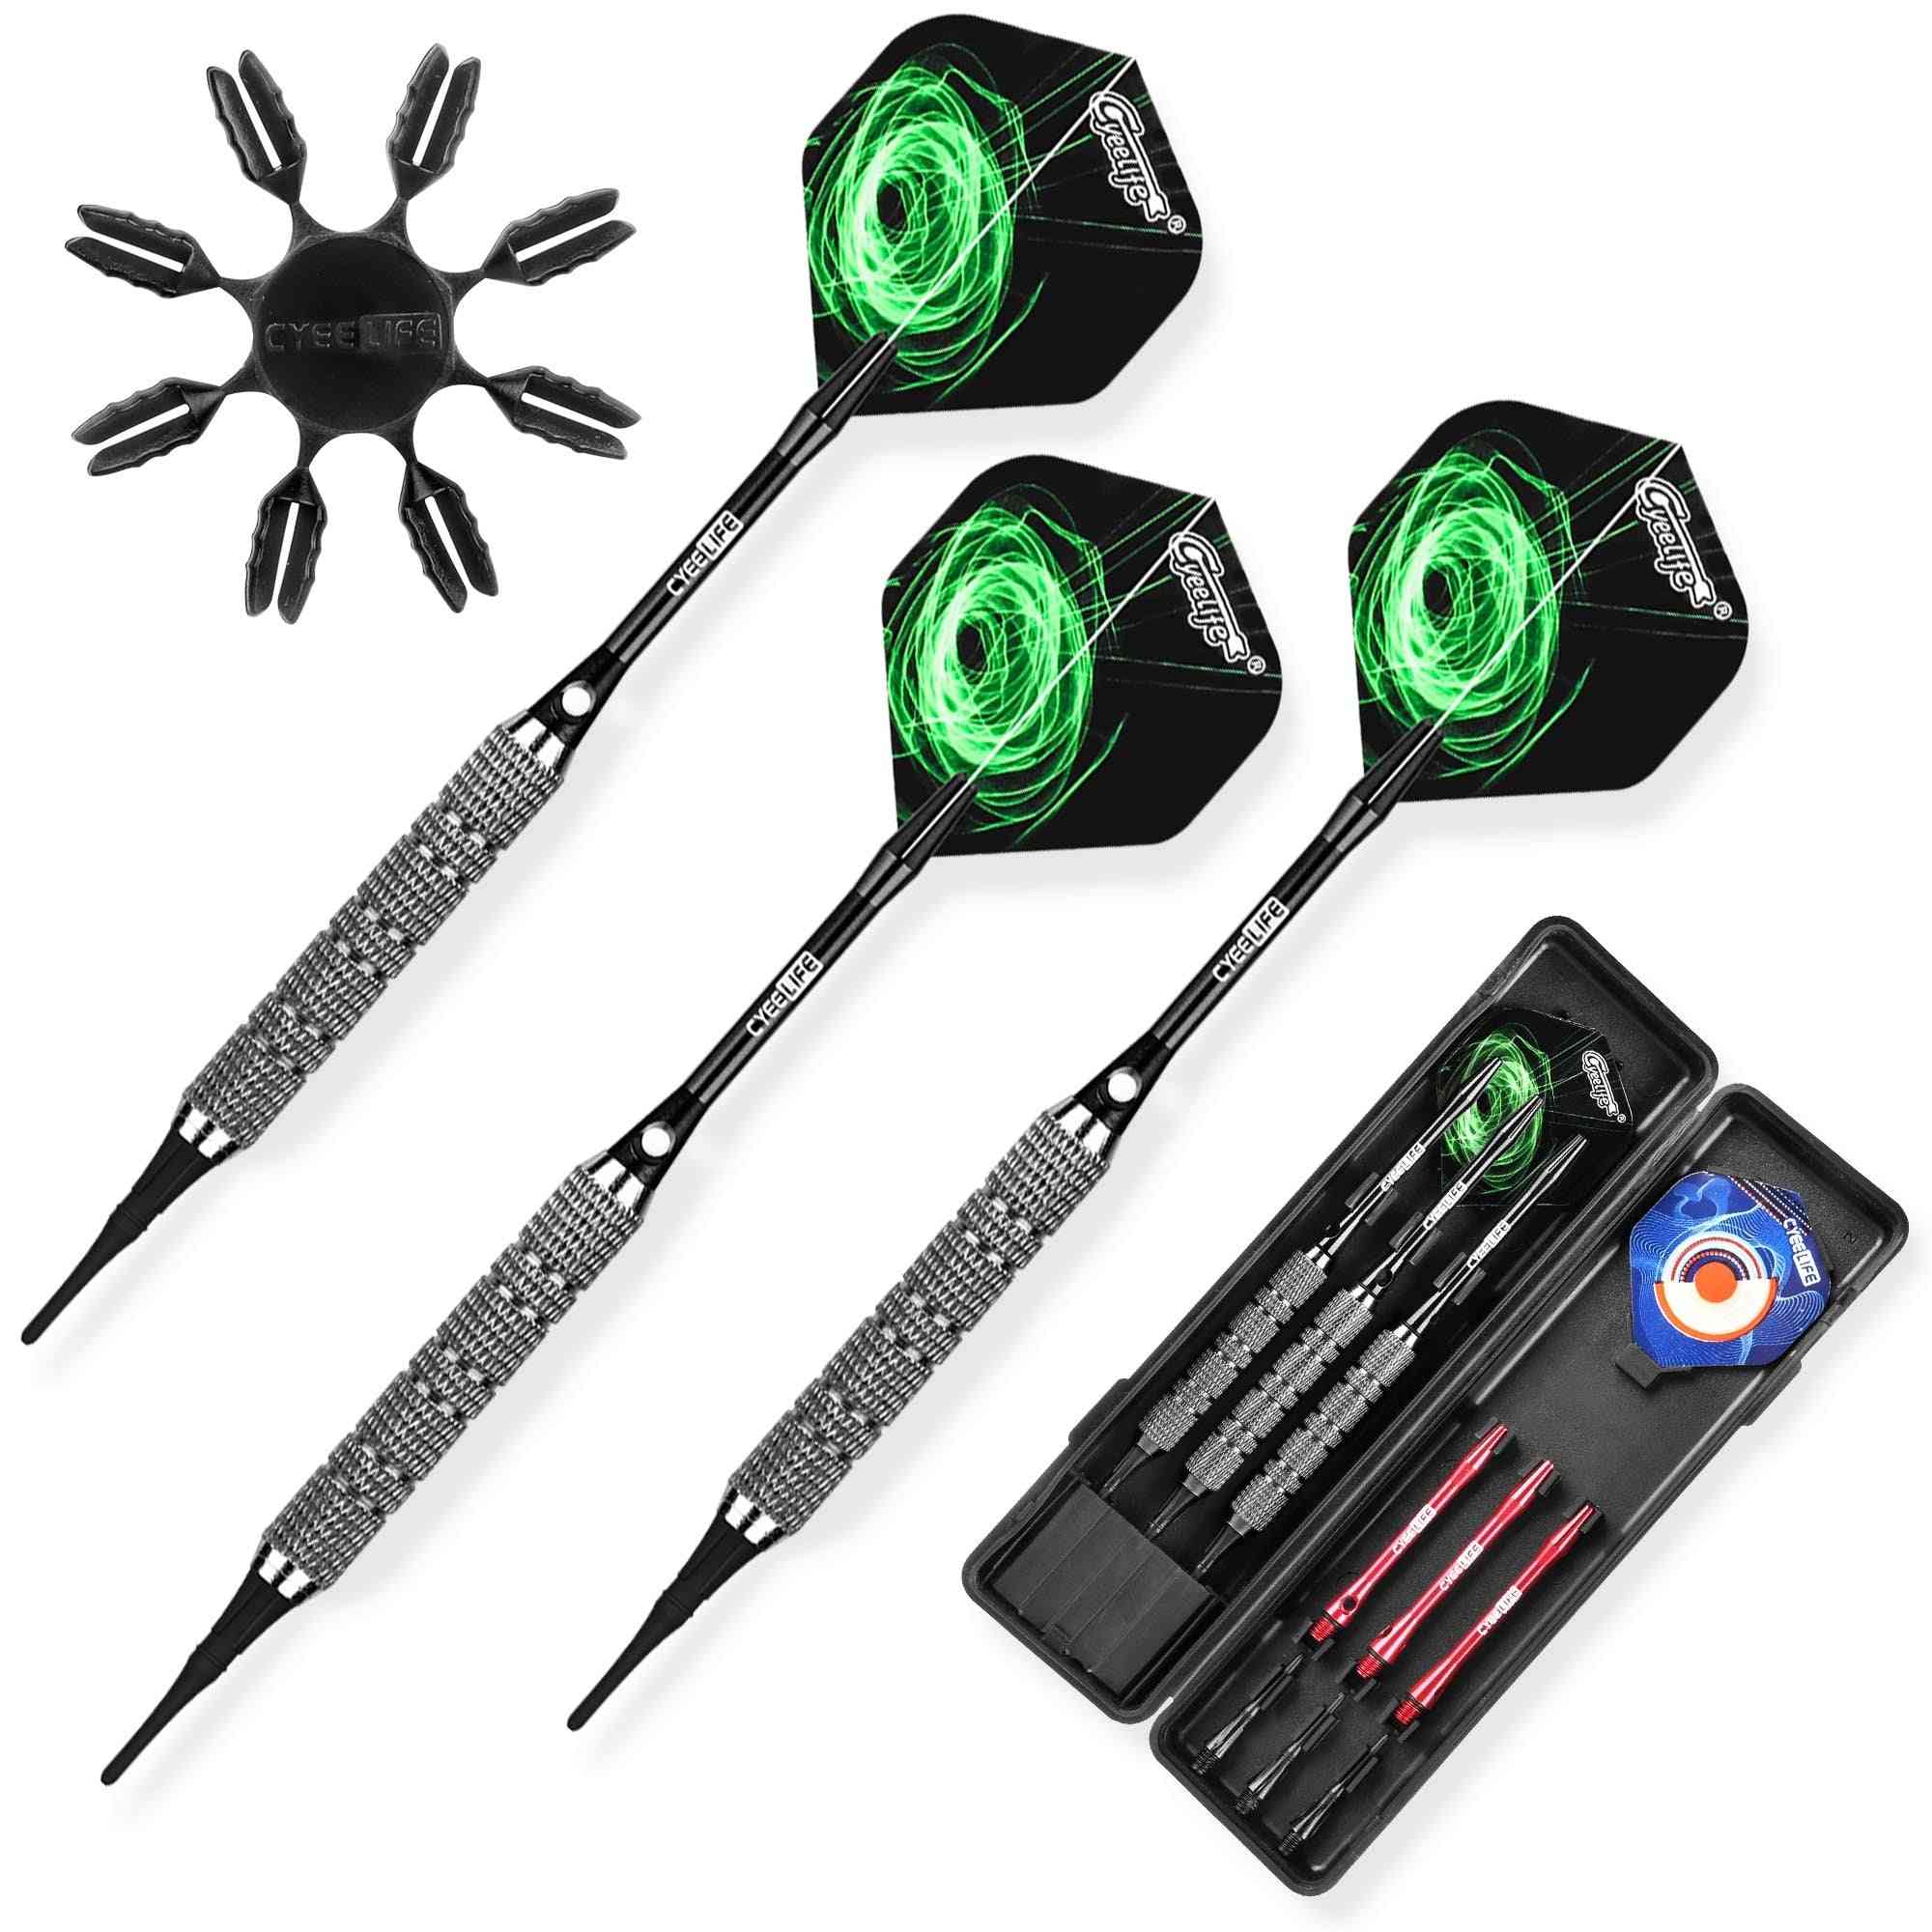 16/18/22g Soft Tip Darts With Carry Case, 6 Aluminium Shafts Protectors